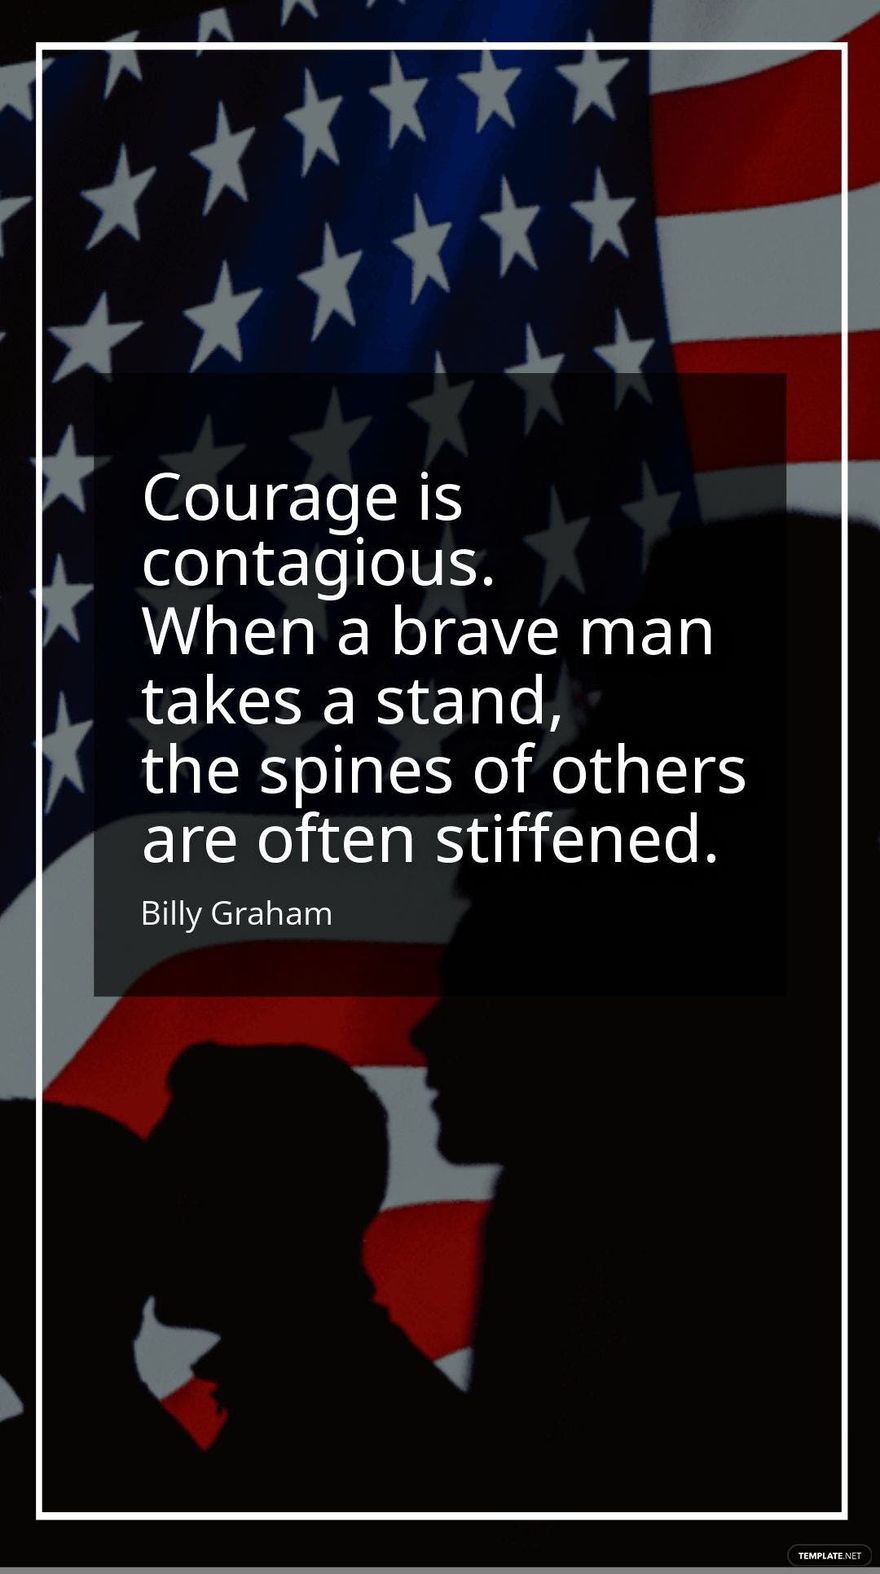  Billy Graham - Courage is contagious. When a brave man takes a stand, the spines of others are often stiffened.